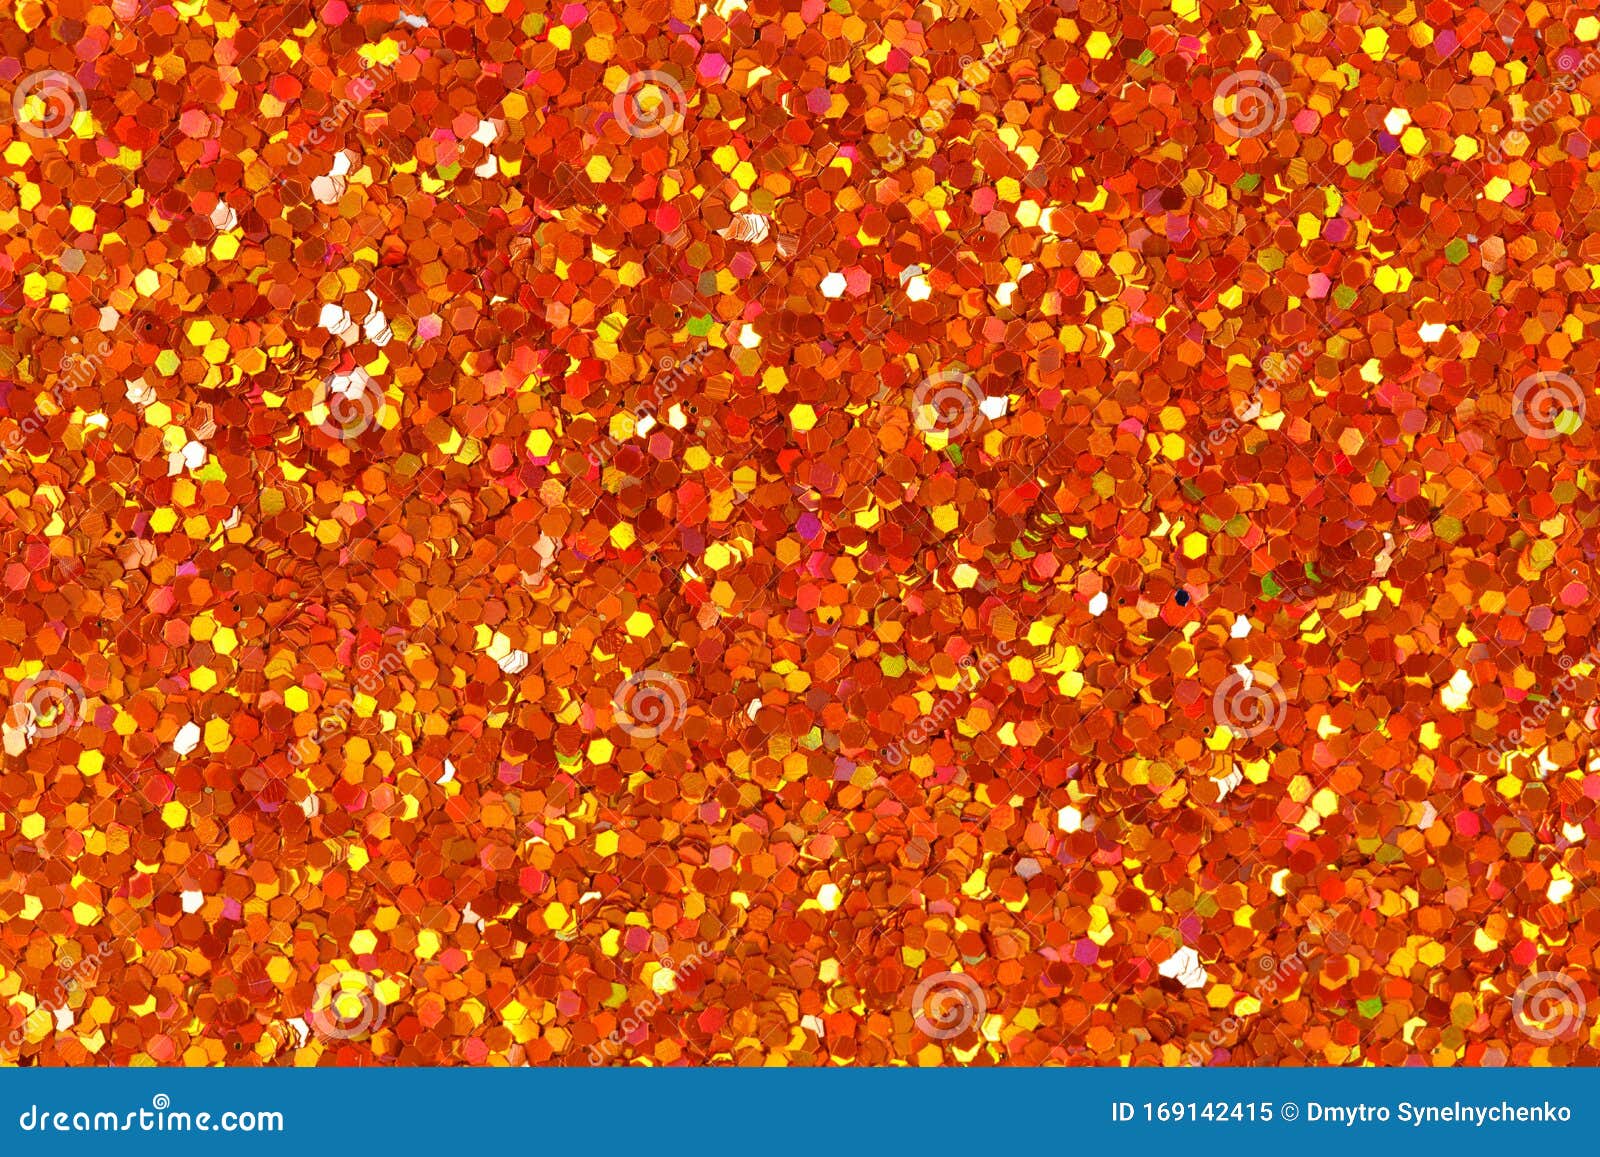 Orange Glitter Texture for Background. Low Contrast Photo. Stock